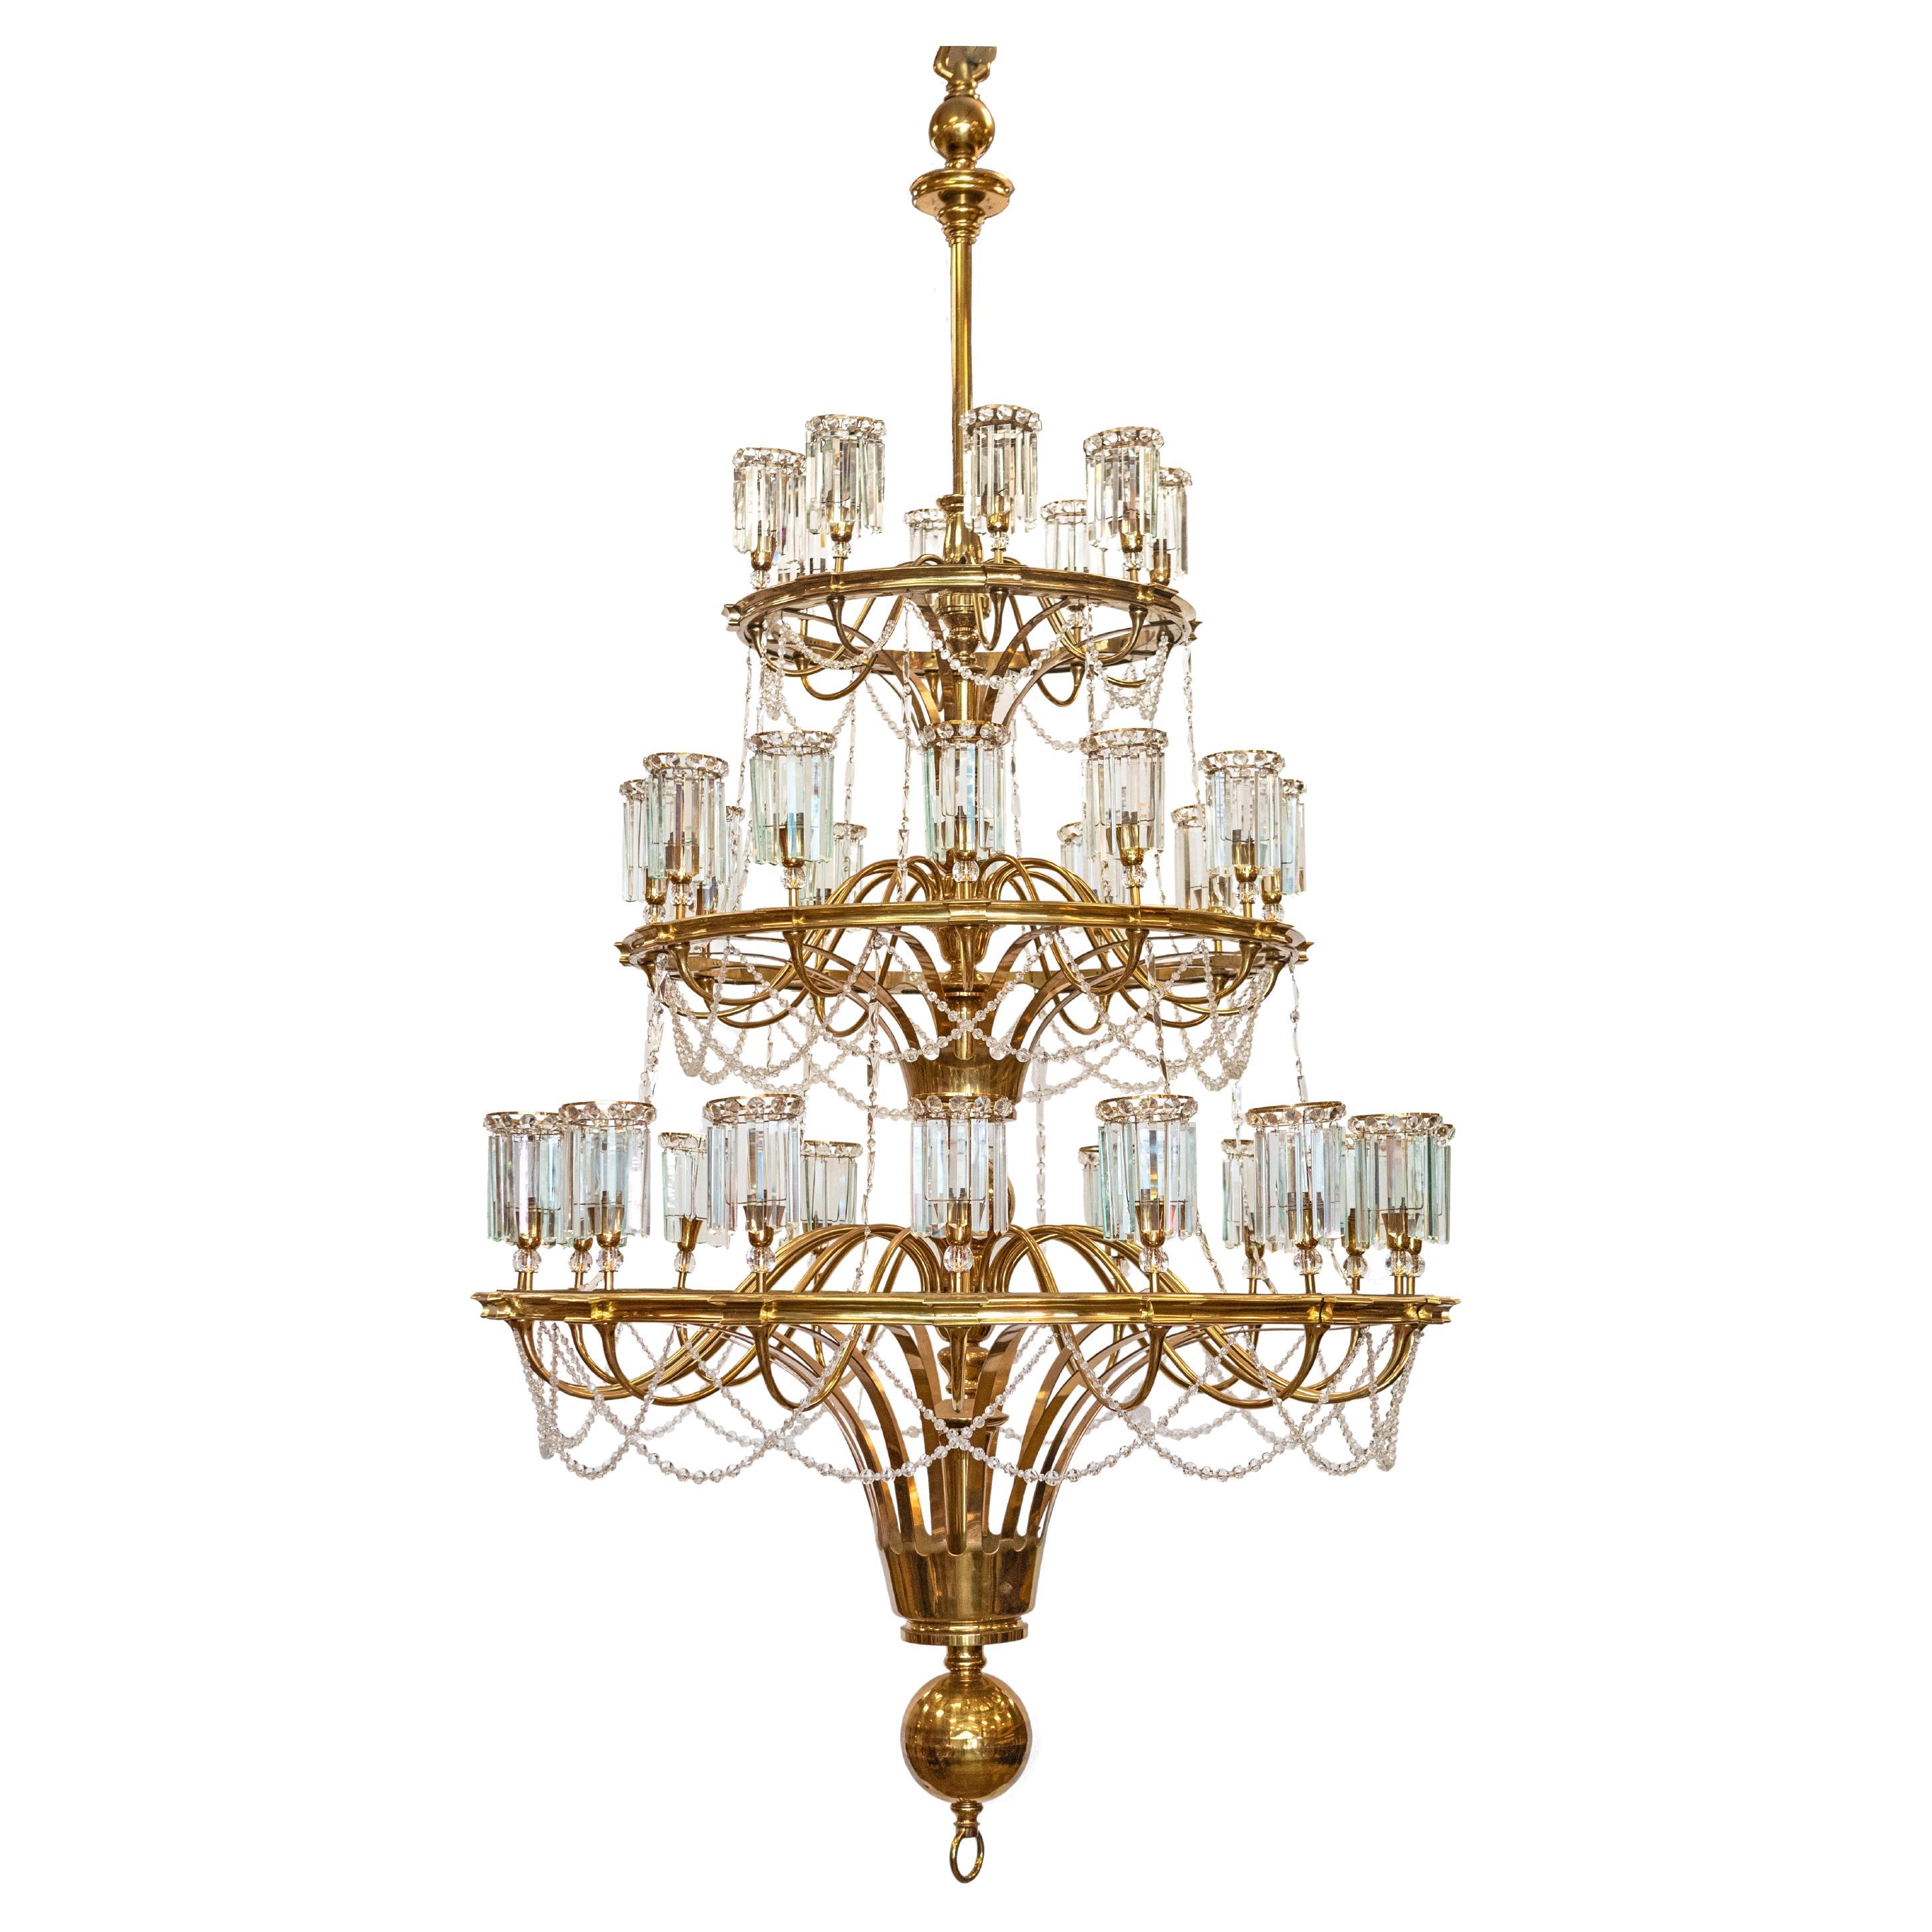 Giant Reclaimed Brass & Crystal Chandelier  >4m Tall For Sale